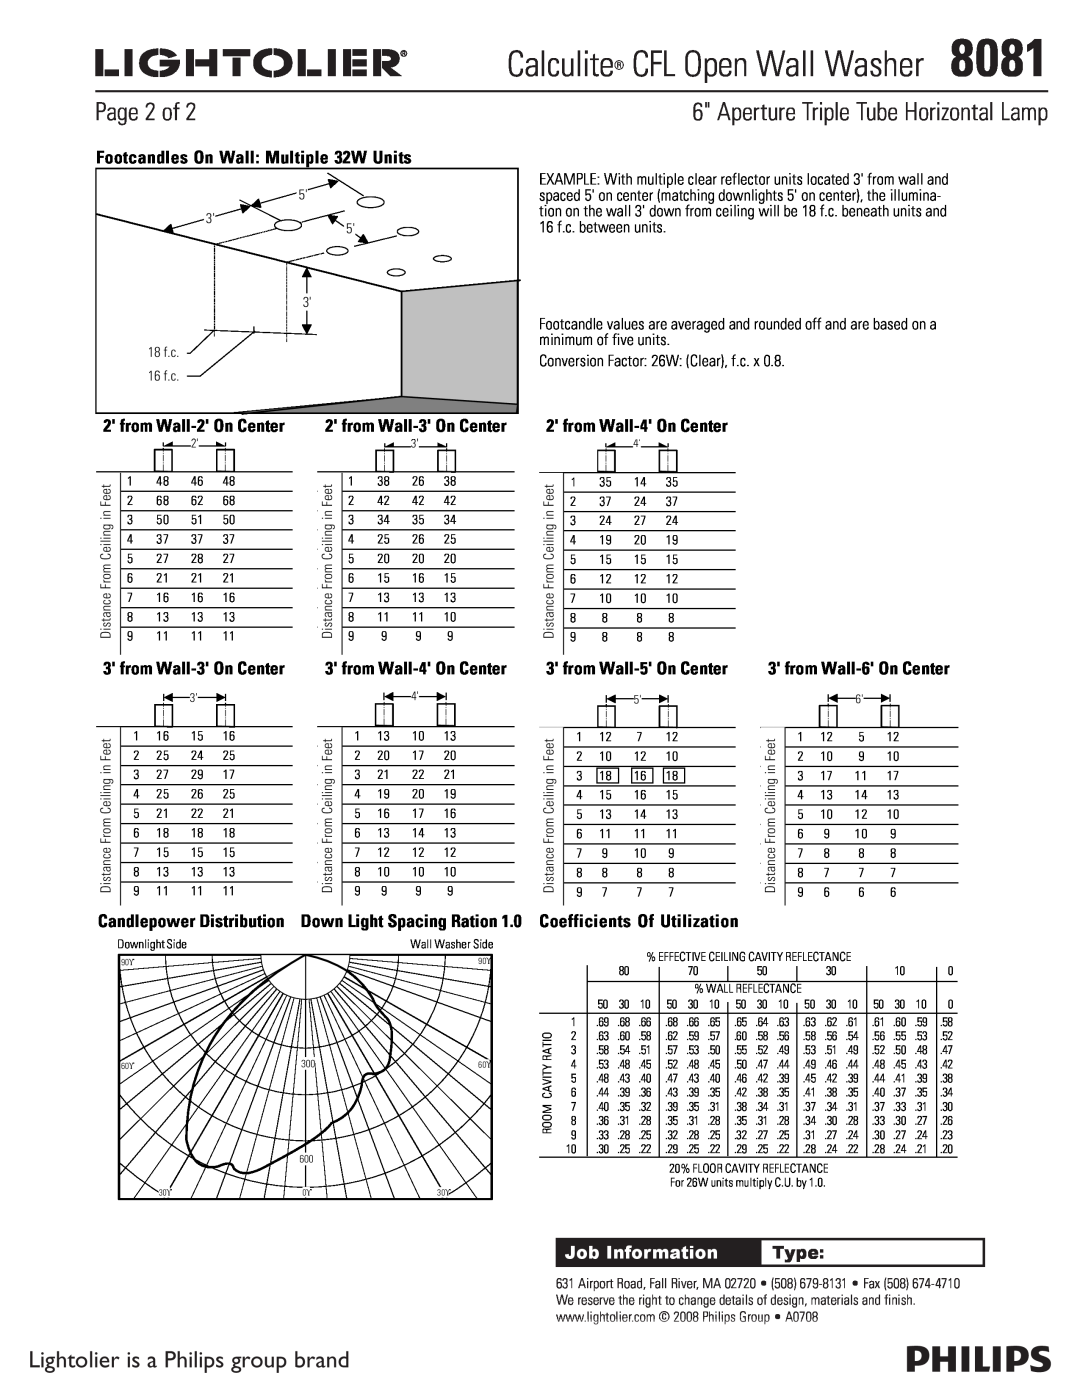 Lightolier Aperture Triple Tube Horizontal Lamp, Page 2 of, Calculite CFL Open Wall Washer8081, from Wall-4On Center 